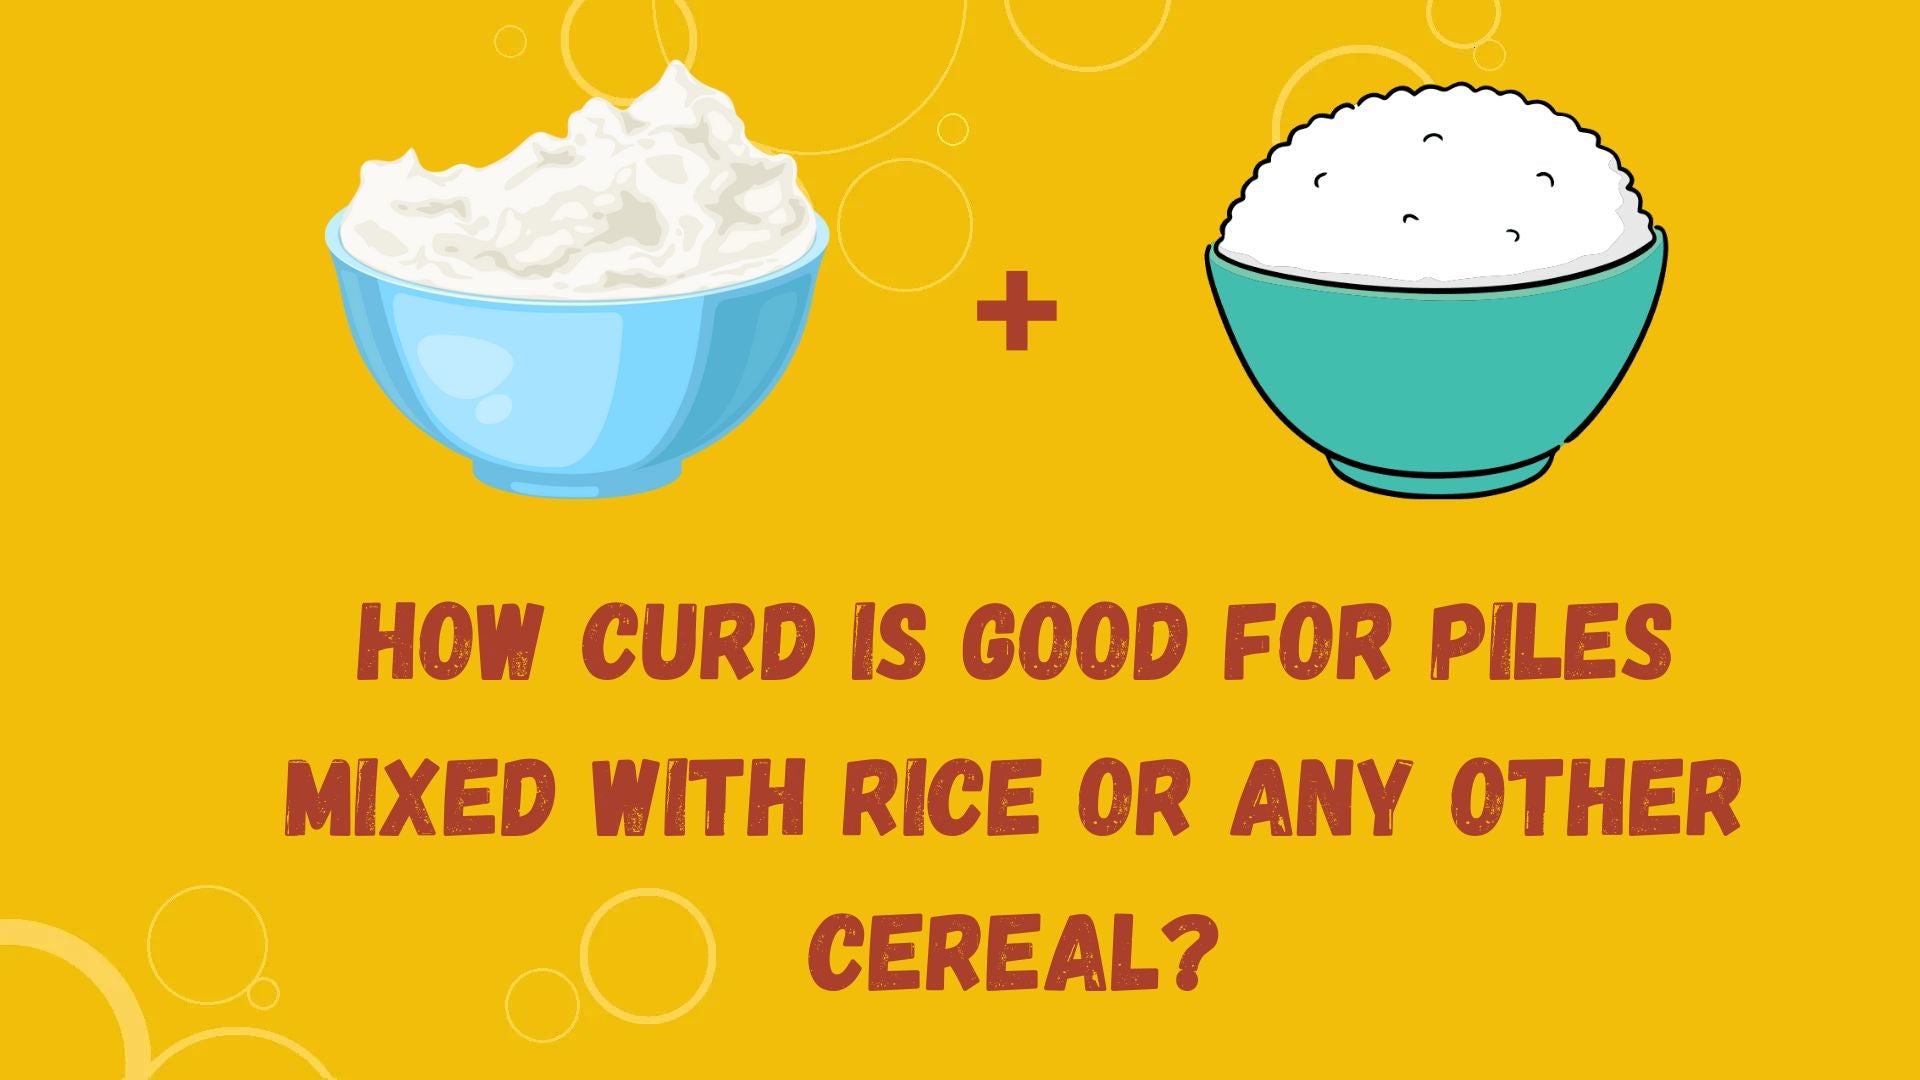 How curd is good for piles mixed with rice or any other cereal